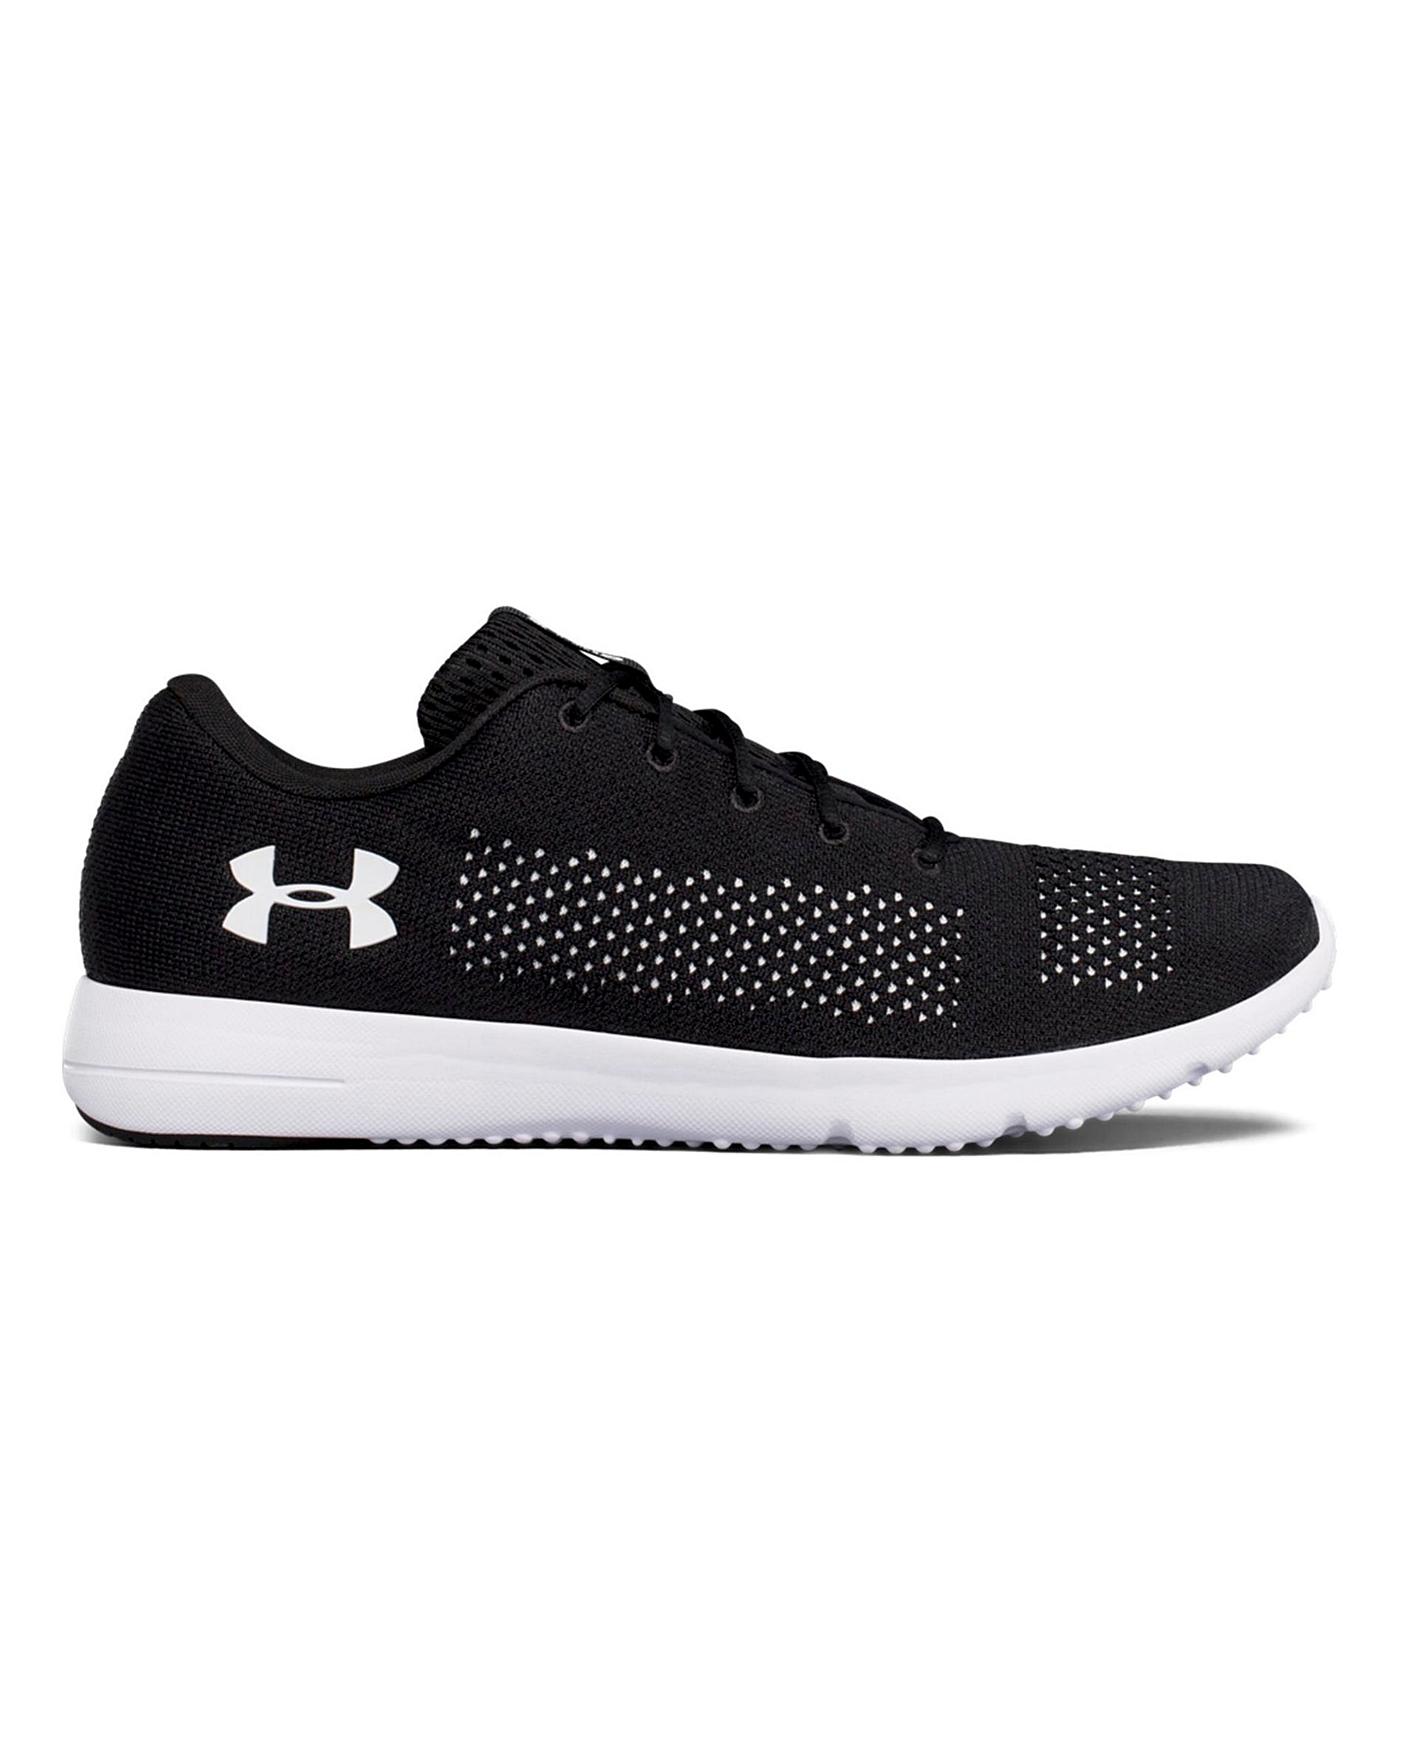 Under Armour Rapid Trainers | Crazy 